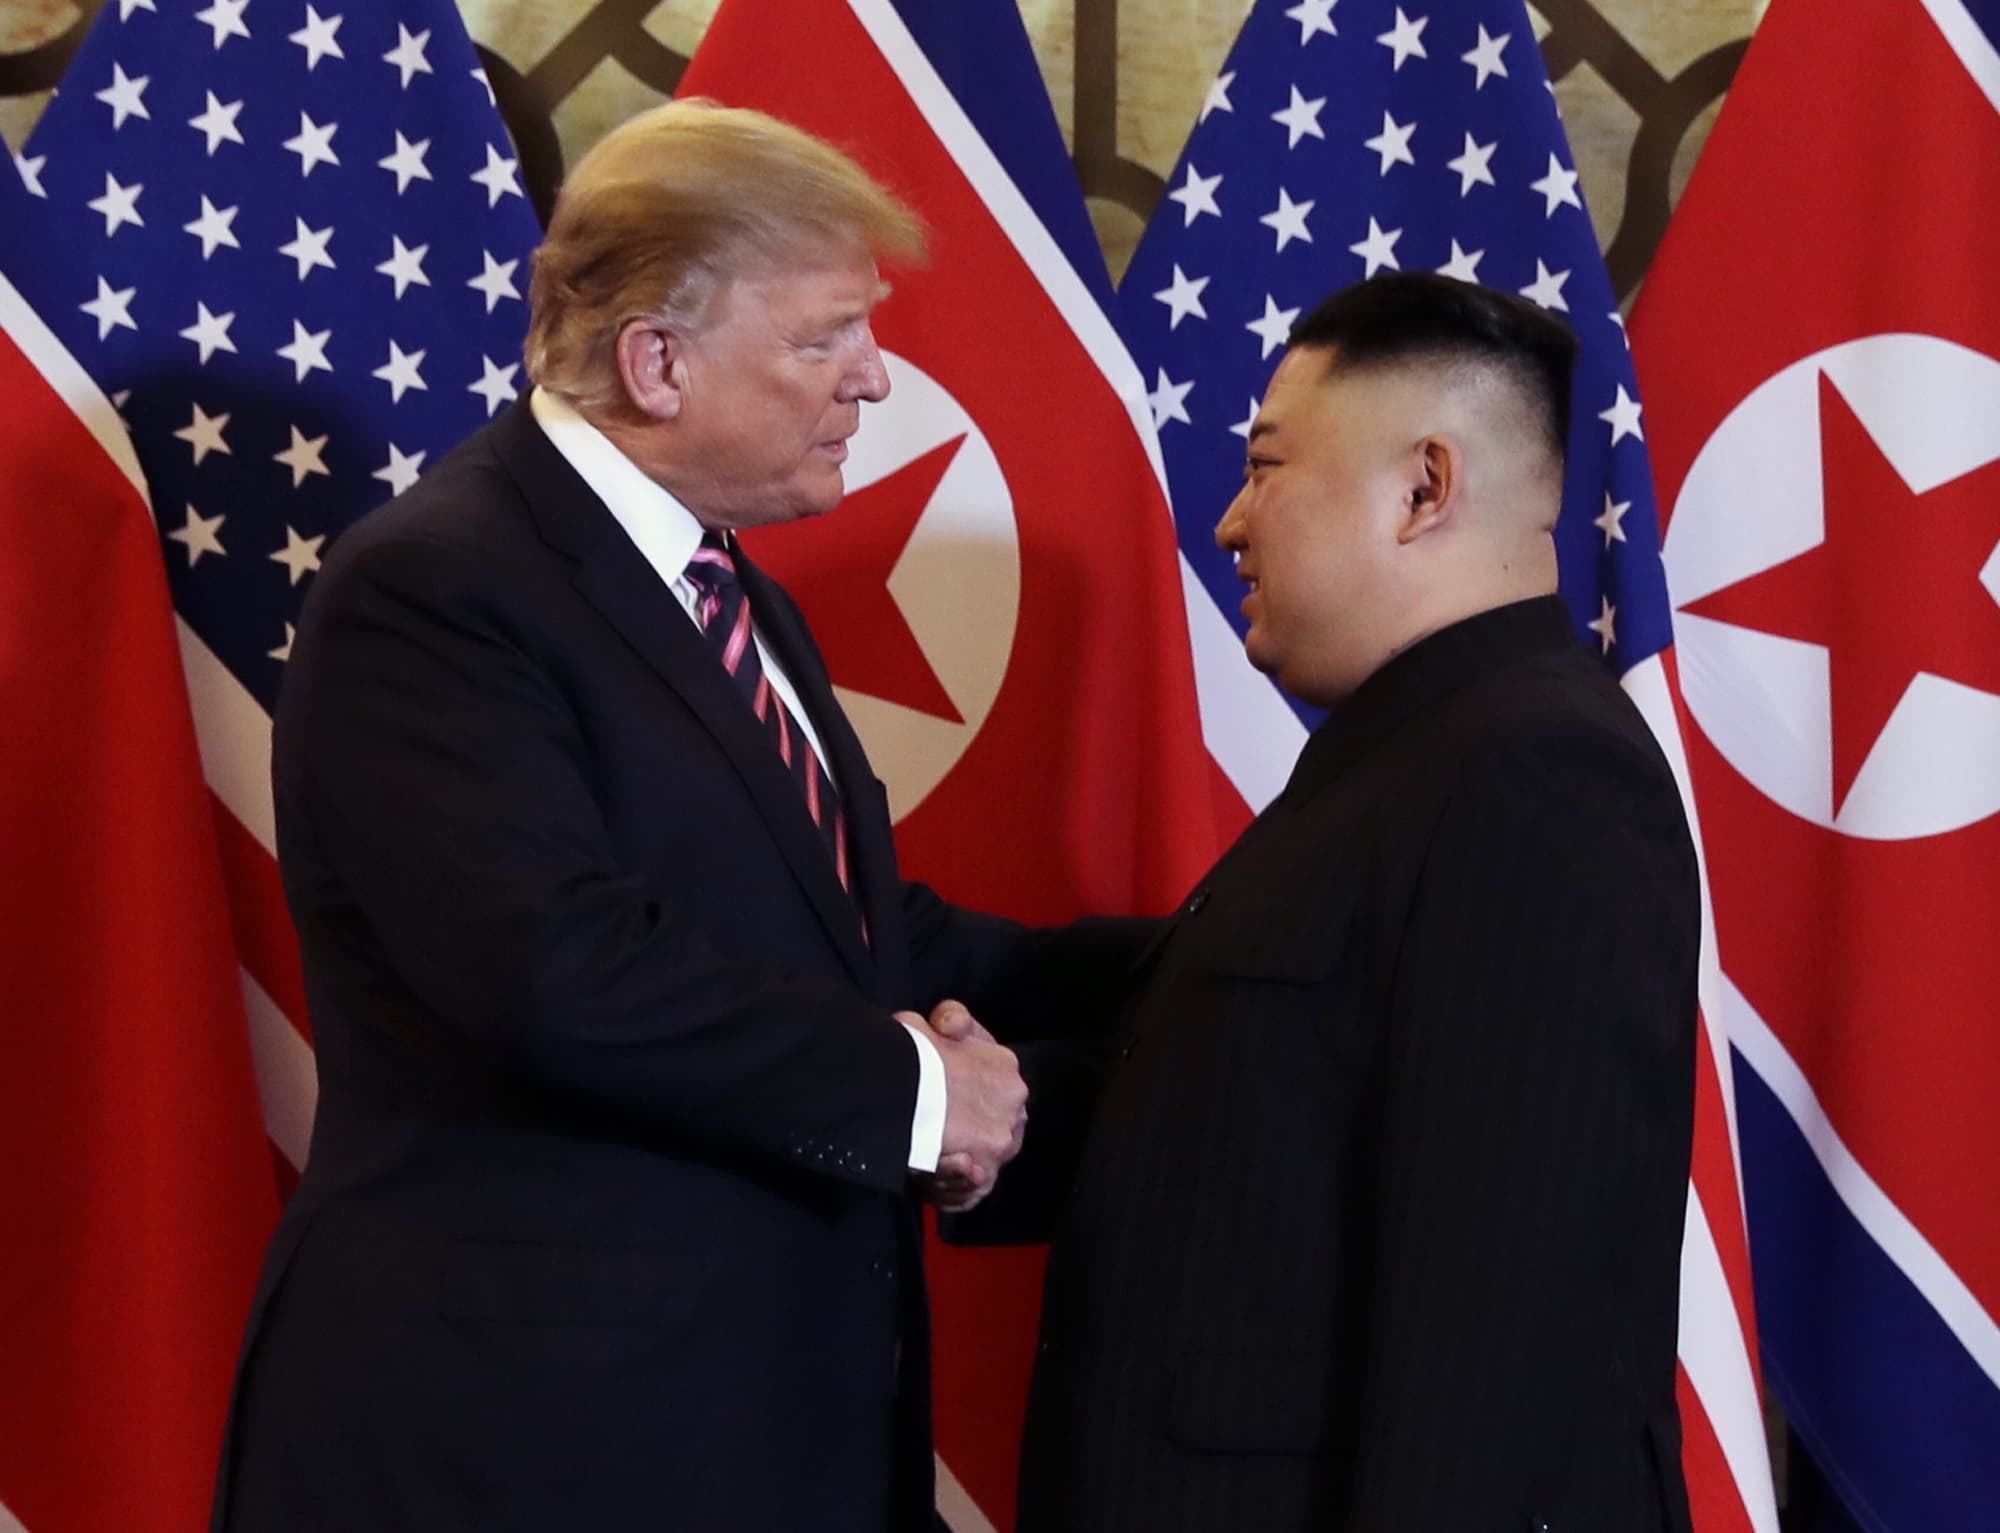 Trump and Kim meet face-to-face in Vietnam as second summit kicks off